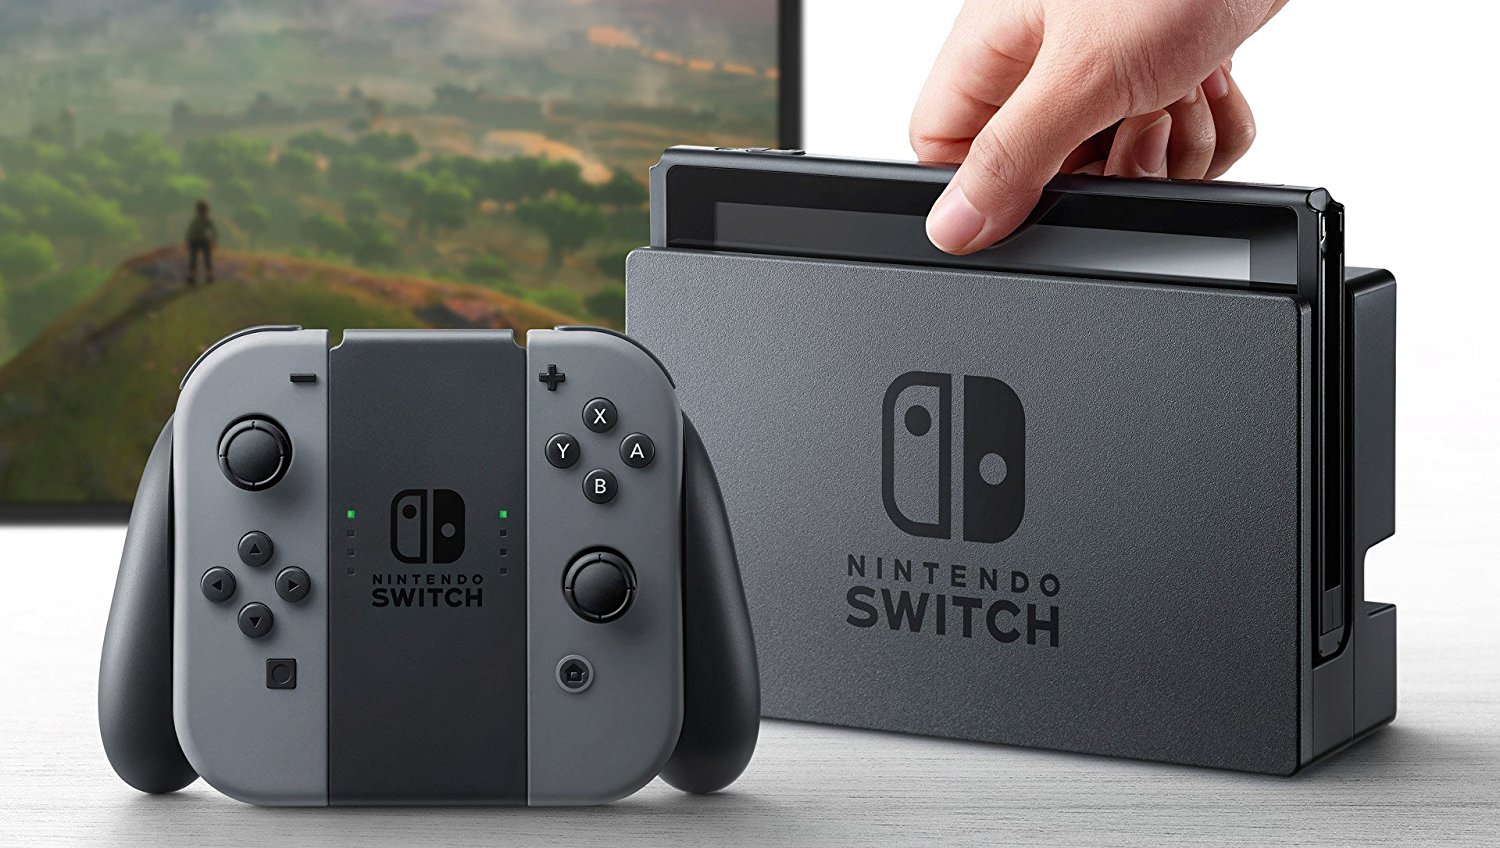 Nintendo Switch Live Stream Events and Preorders Begin